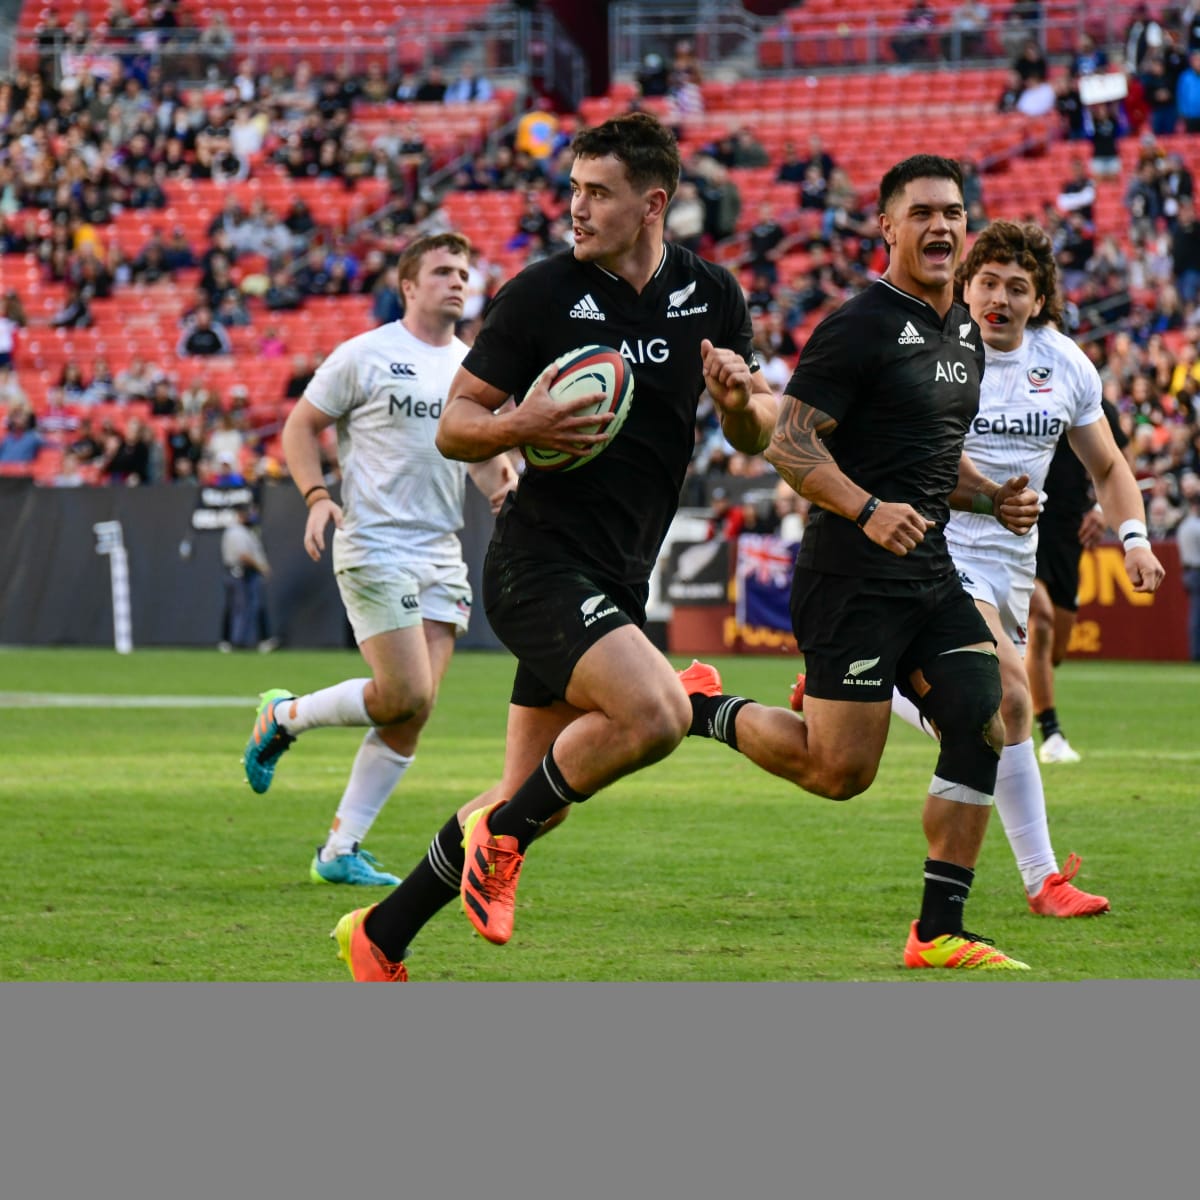 Watch World Rugby Sevens Series Los Angeles day 2 Stream live - How to Watch and Stream Major League and College Sports